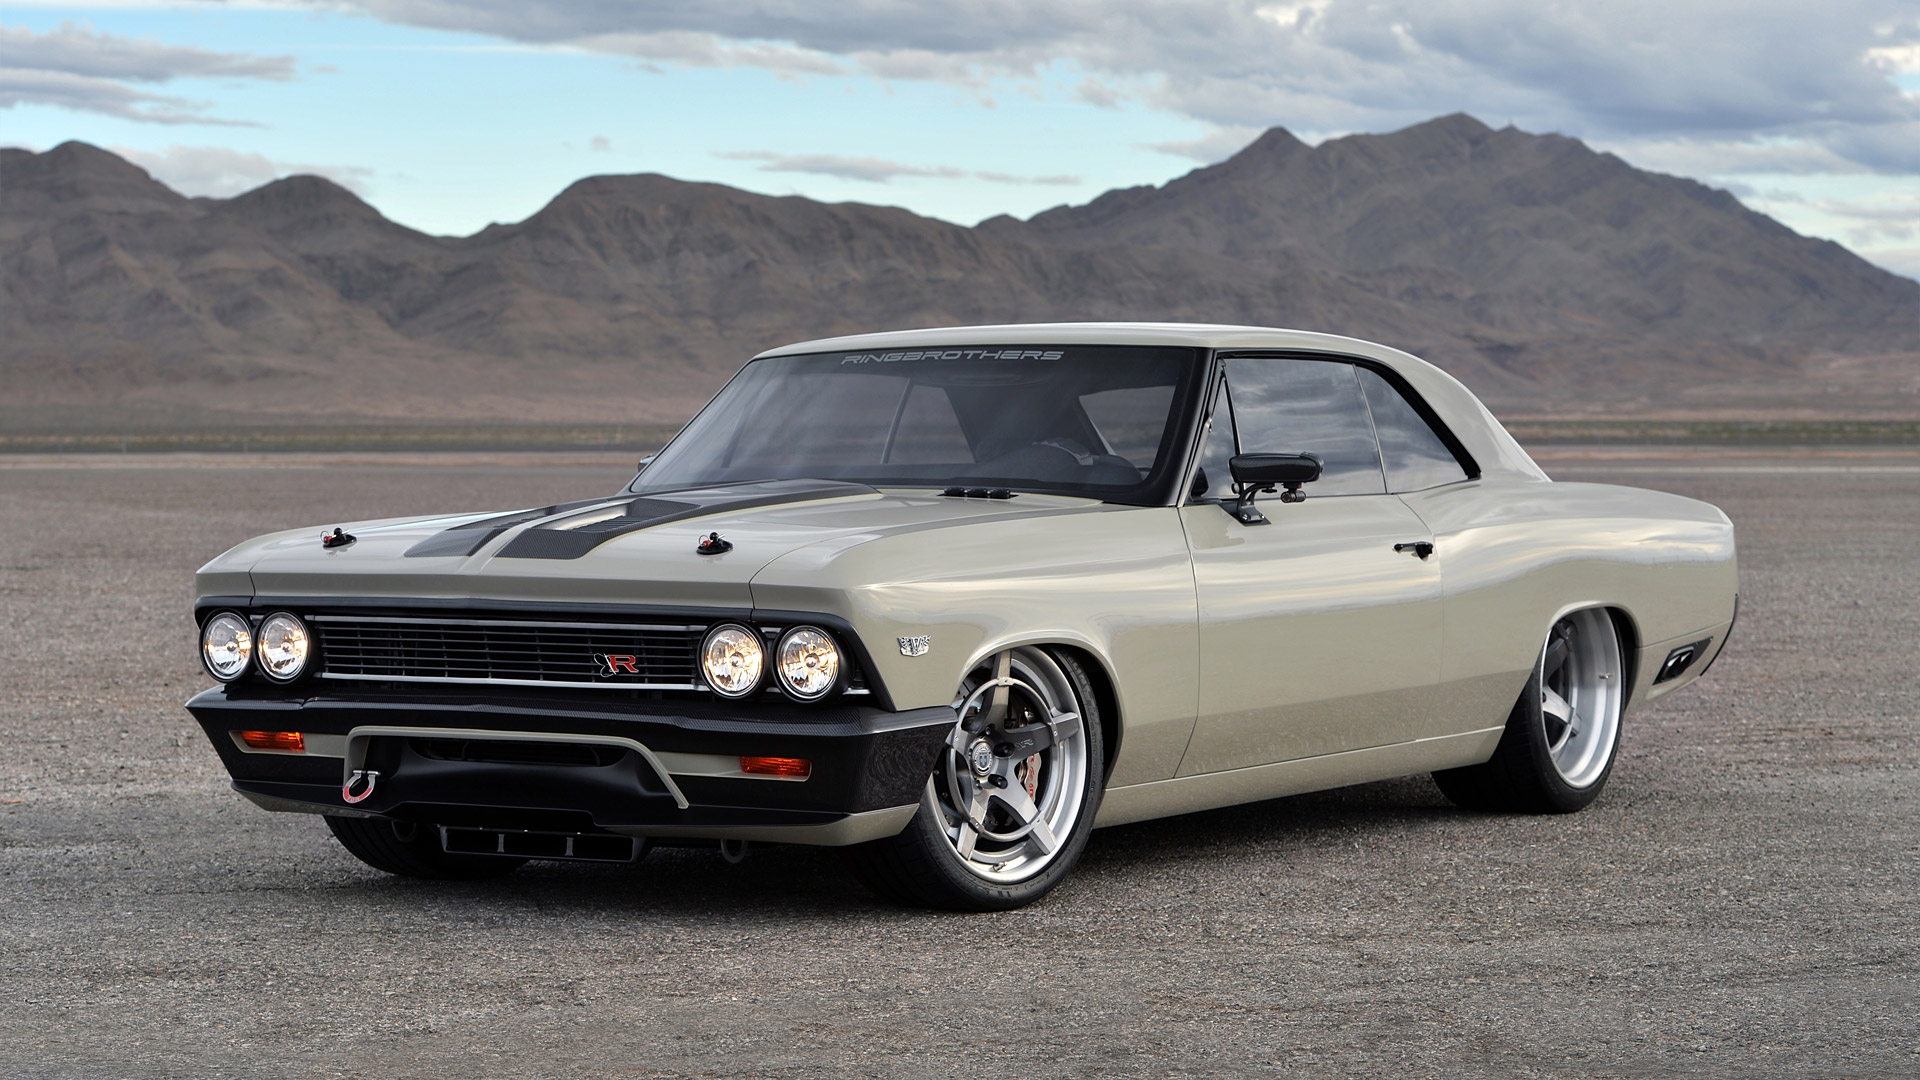 Beige Car Car Chevrolet Chevelle Recoil Muscle Car Ringbrothers 1920x1080